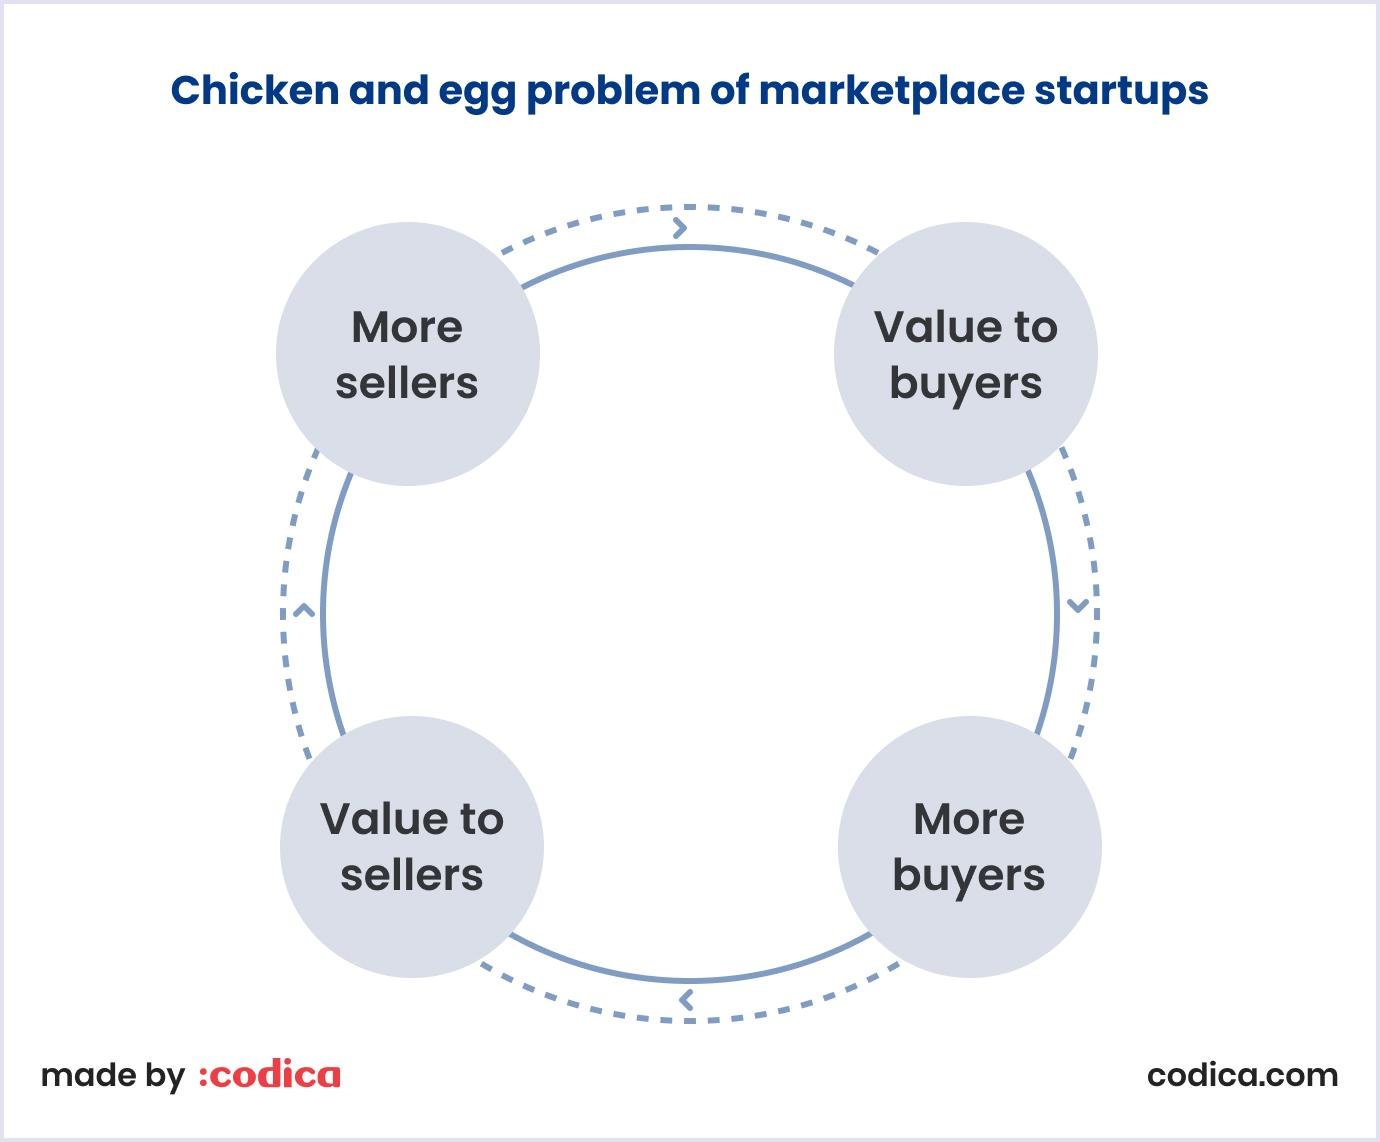 Chicken and egg problem of marketplace startups